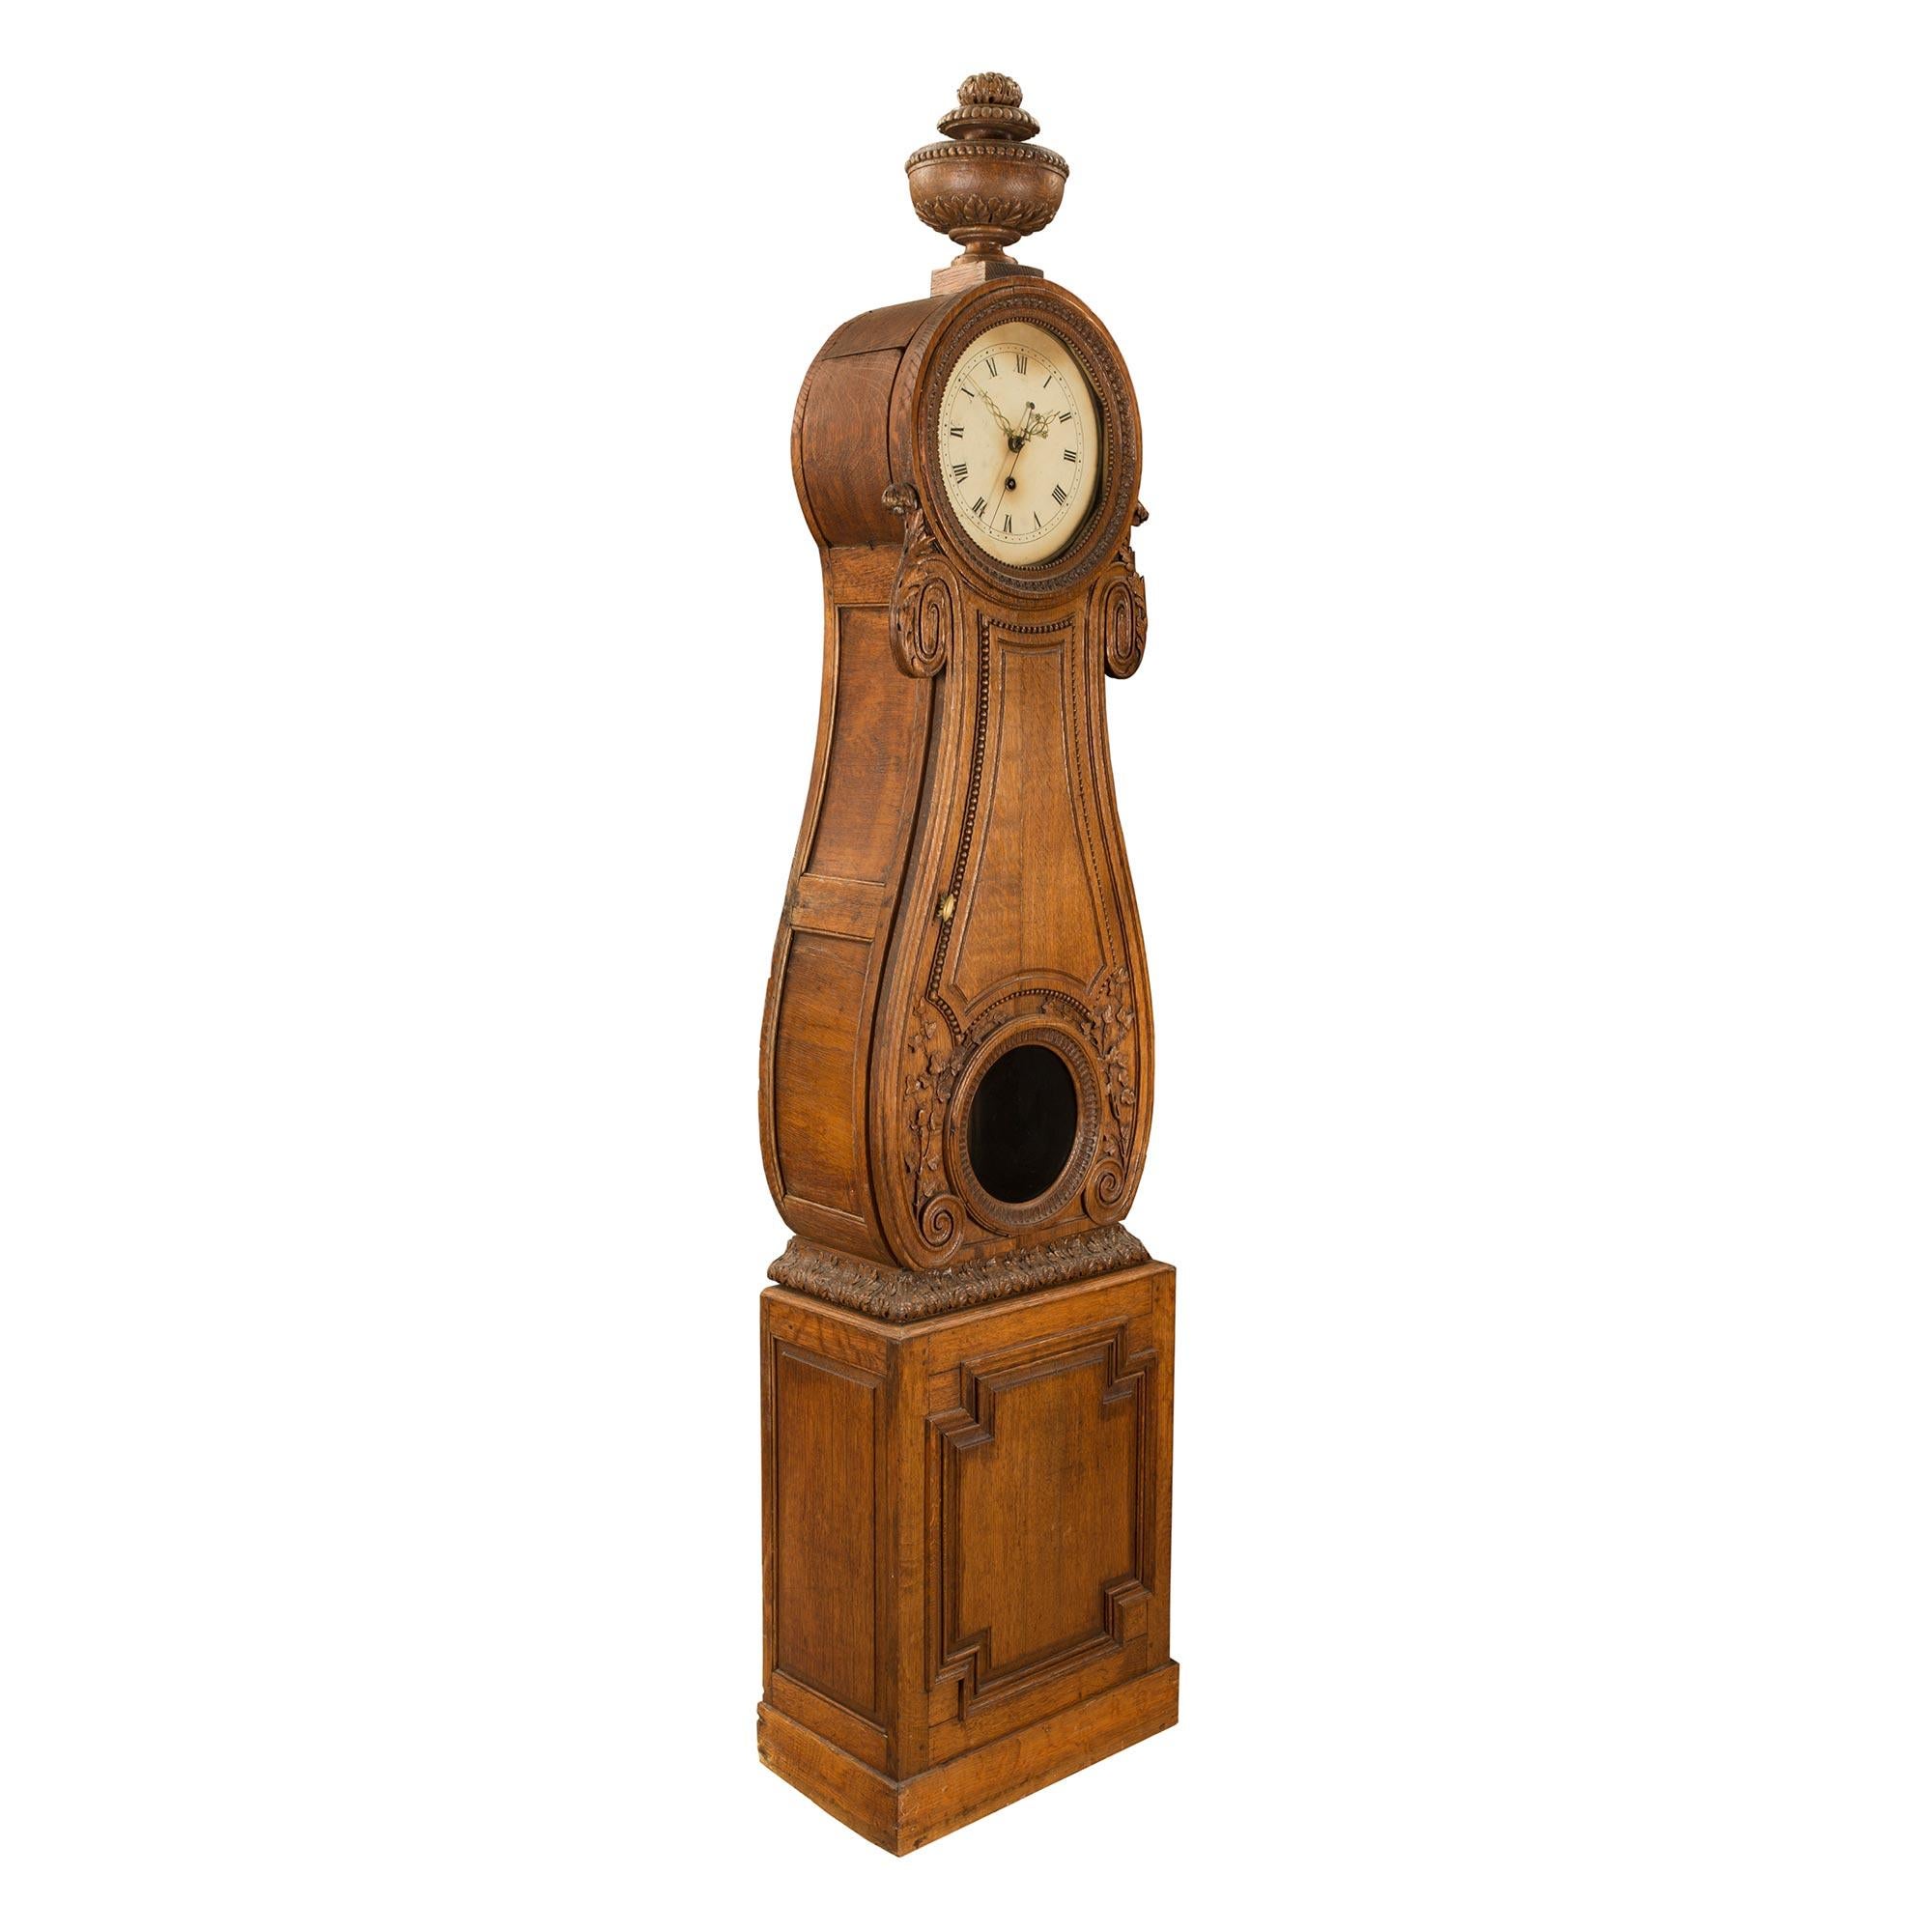 A handsome French 18th century Louis XVI period oak grandfather clock. The clock is raised by a square mottled base with an elegant carved recessed design. At the center is a finely carved acanthus leaf border below the circular glass display with